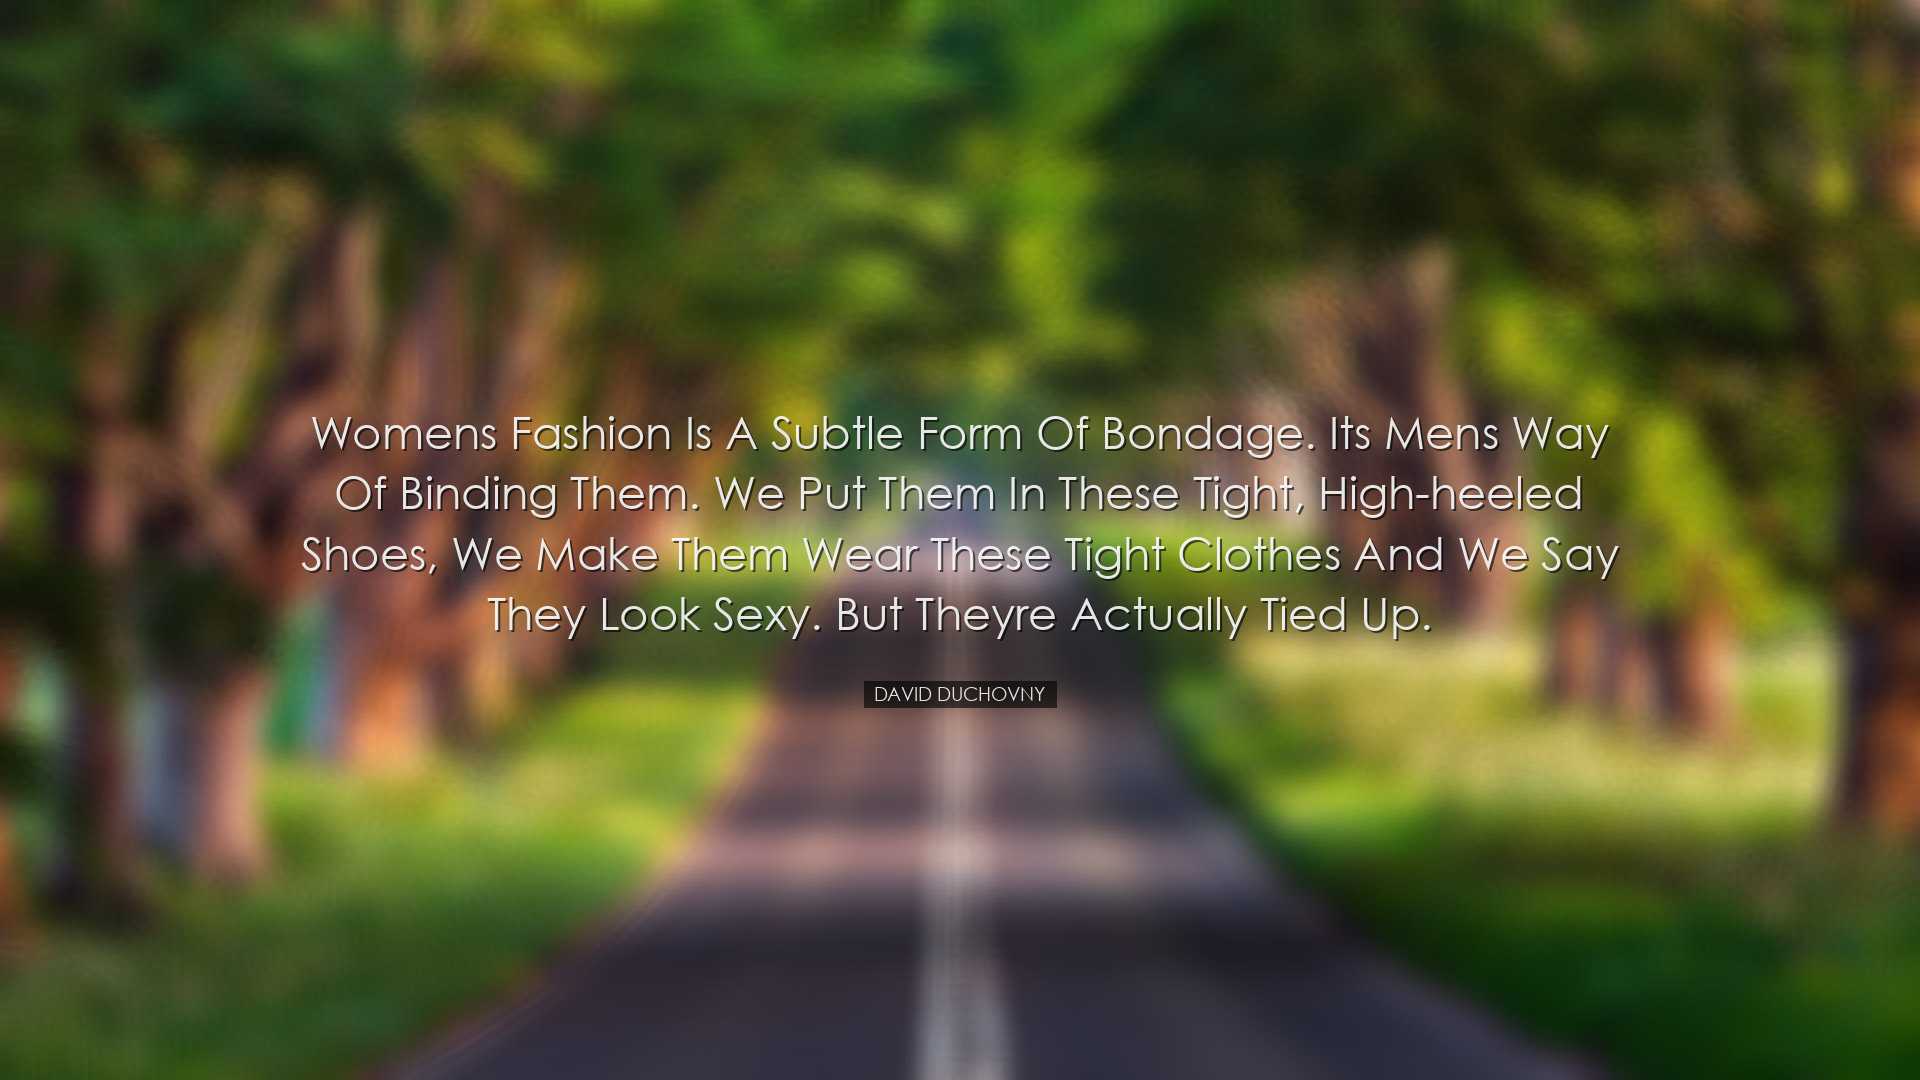 Womens fashion is a subtle form of bondage. Its mens way of bindin